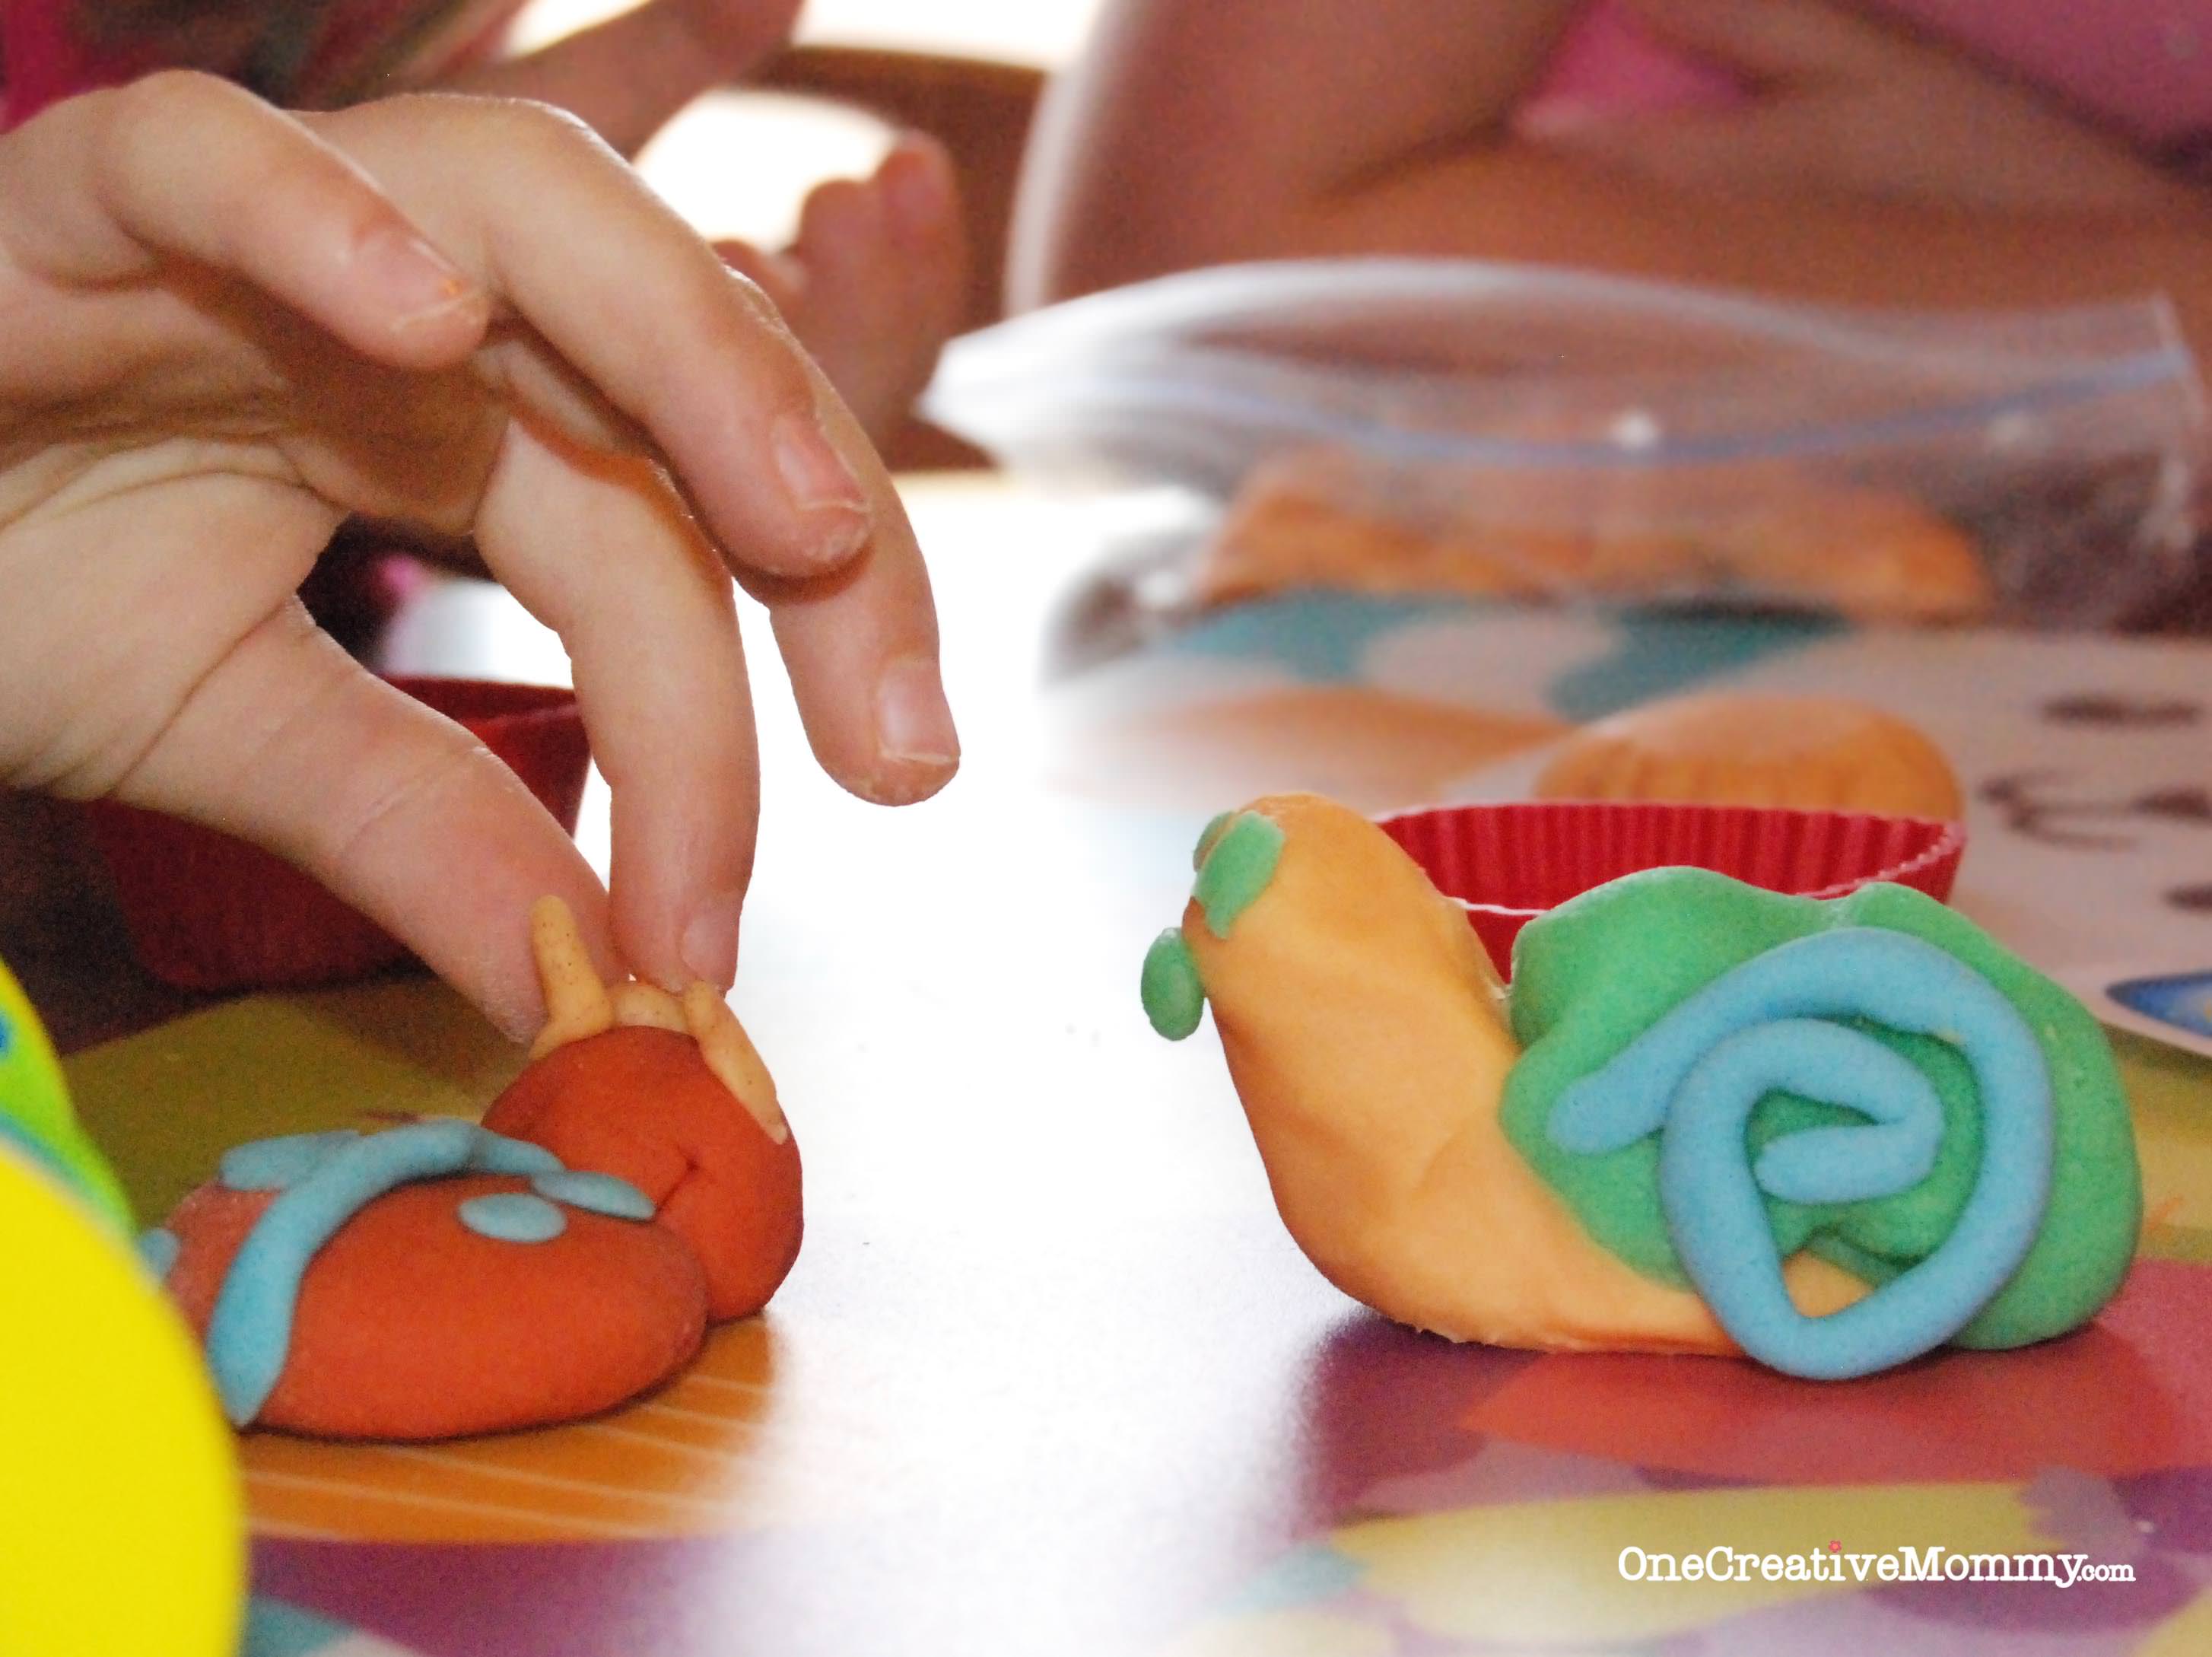 Gluten-Free Play Dough Recipe Review and Tips from OneCreativeMommy.com -- I tried three recipes to see which was the best! #glutenfree #playdough